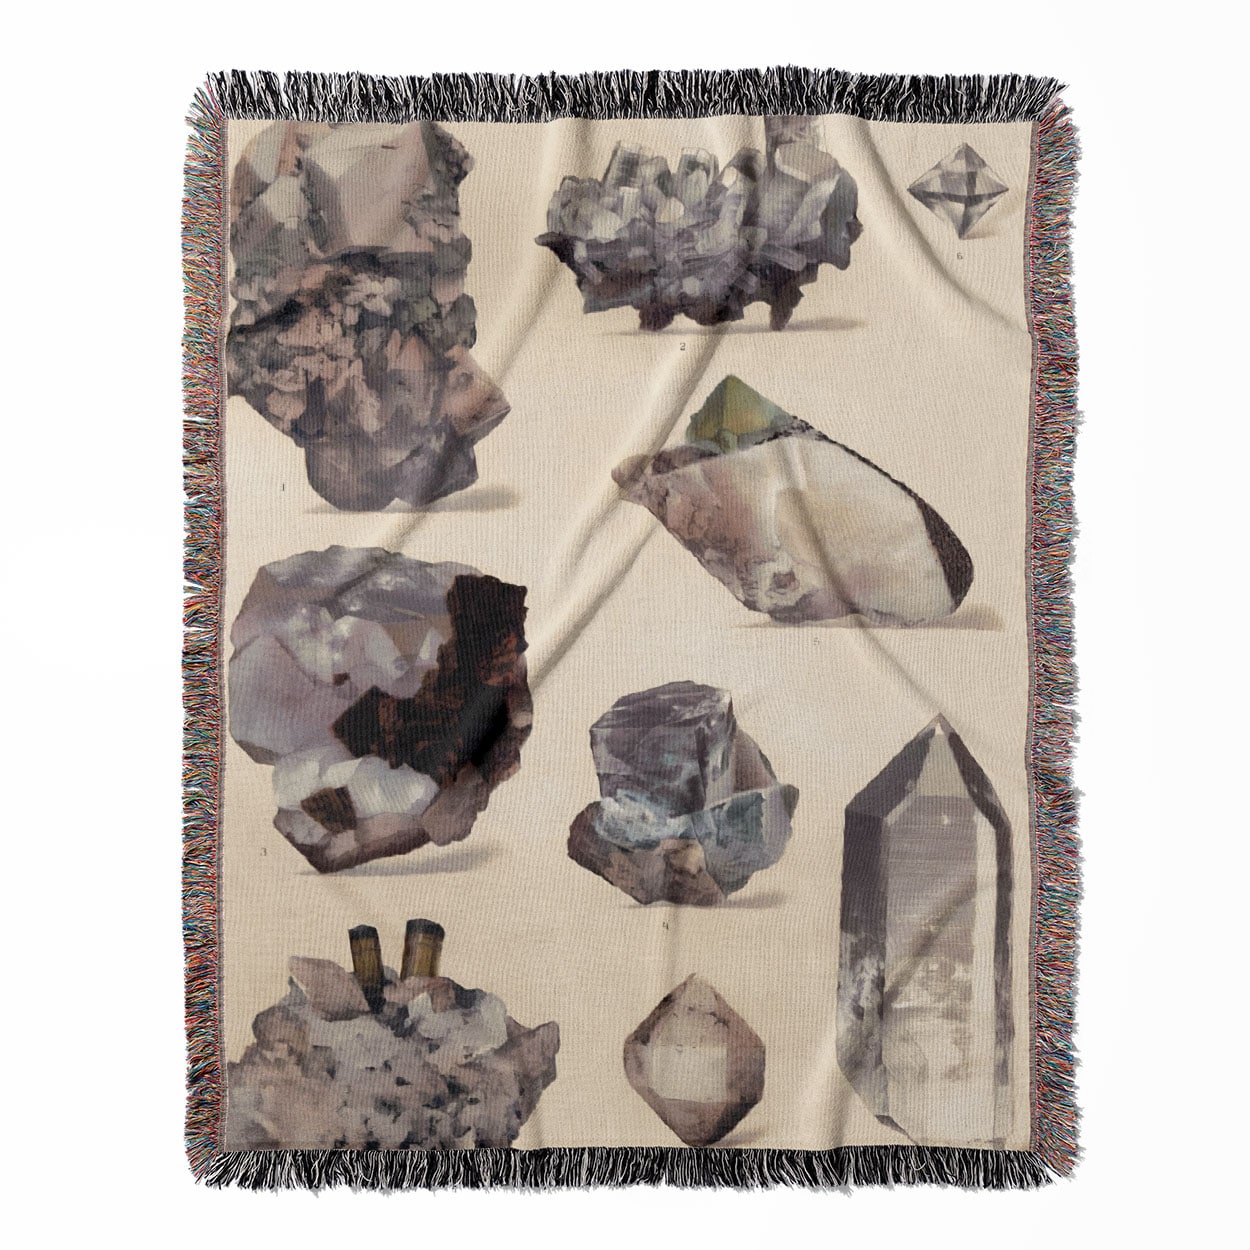 Crystals and Gemstones woven throw blanket, made of 100% cotton, presenting a soft and cozy texture with a geology diagram for home decor.